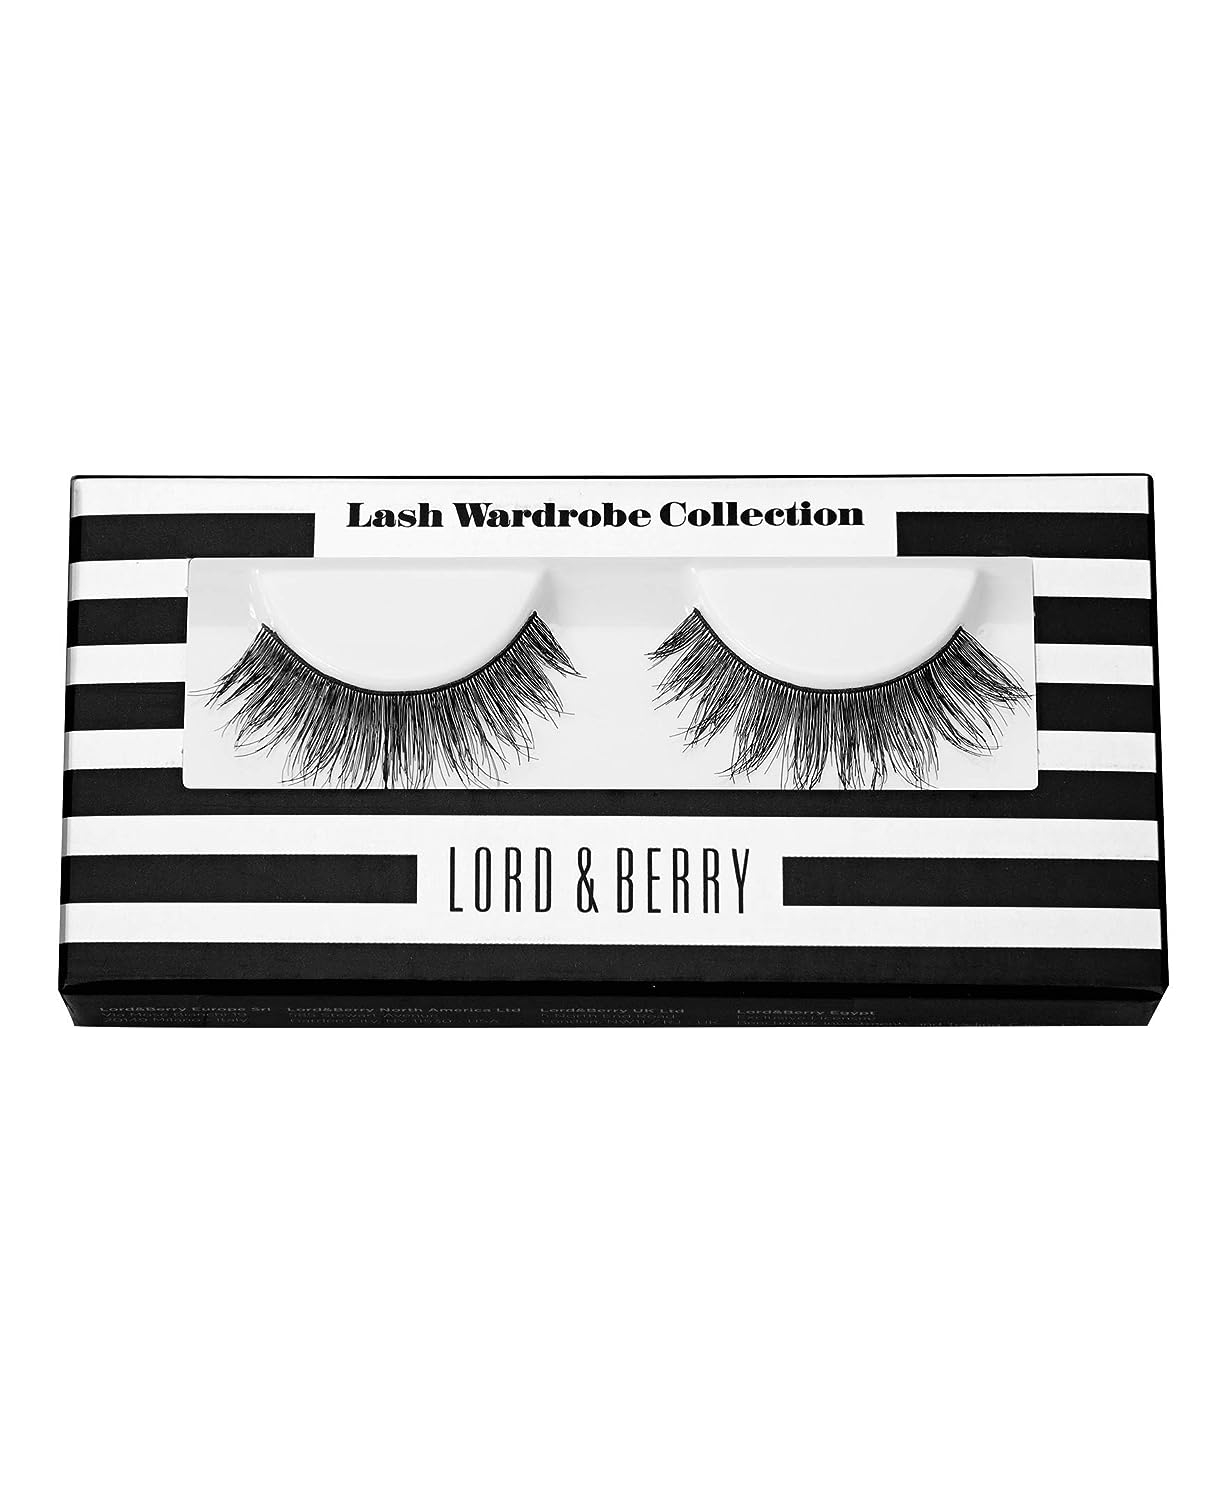 Lord & Berry Lash Wardrobe Collection Double Layered, Cross Hair Design False Natural Eyelashes With Silk Fibers   price